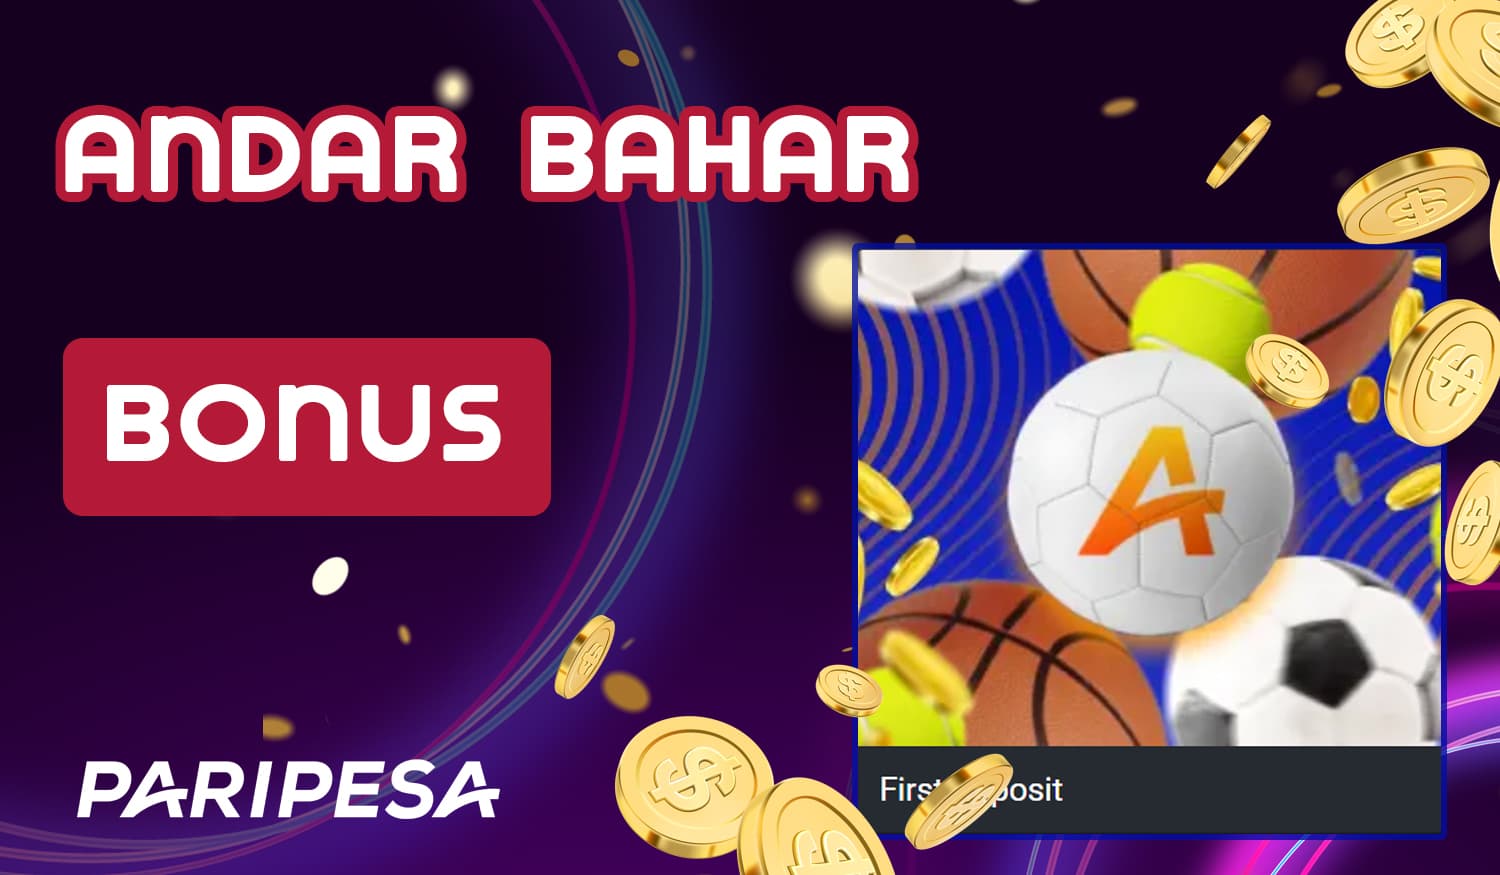 What bonuses fans of online casino and andar bahar games can get on PariPesa Casino website